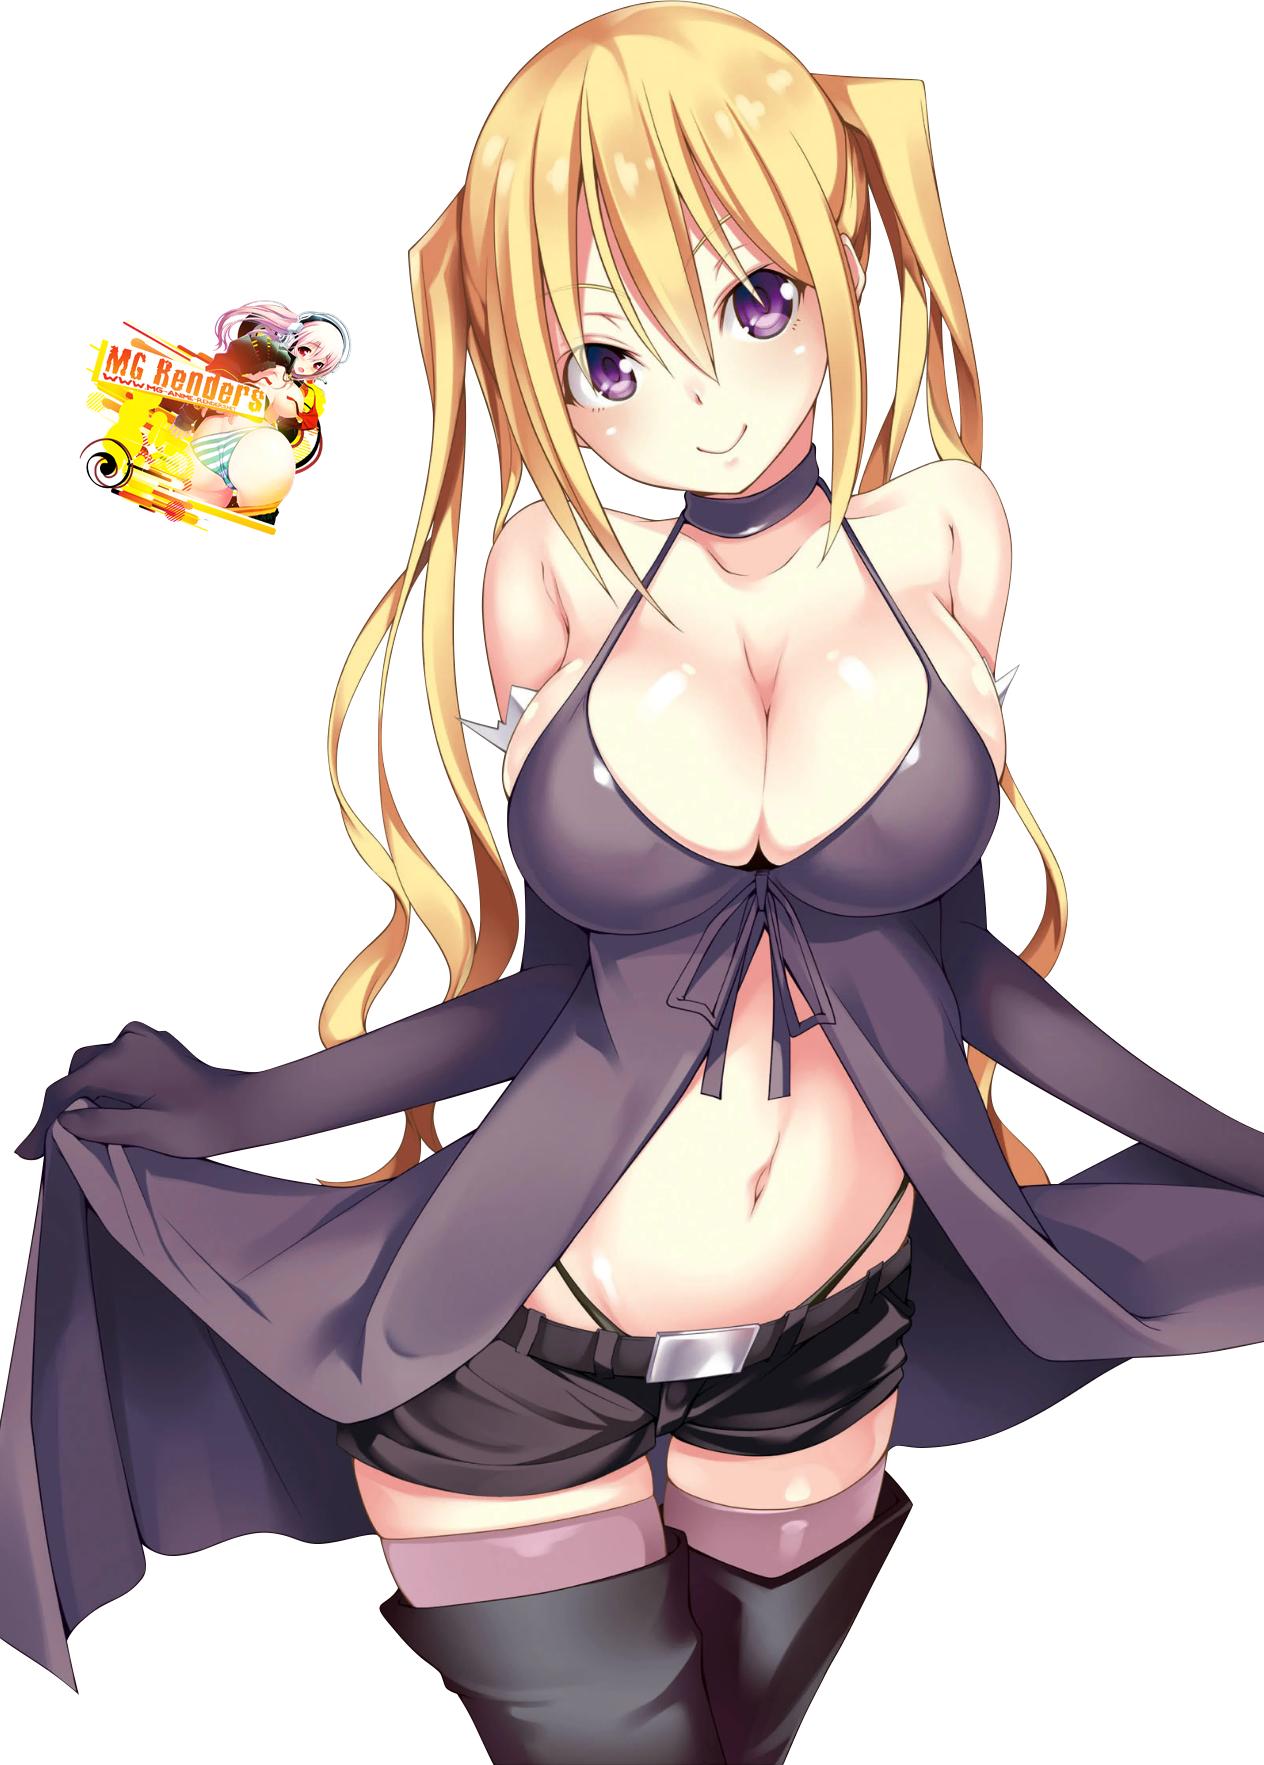 Large Breasts,Lieselotte Sherlock,Thigh Highs,Trinity Seven,Twintails,Rende...